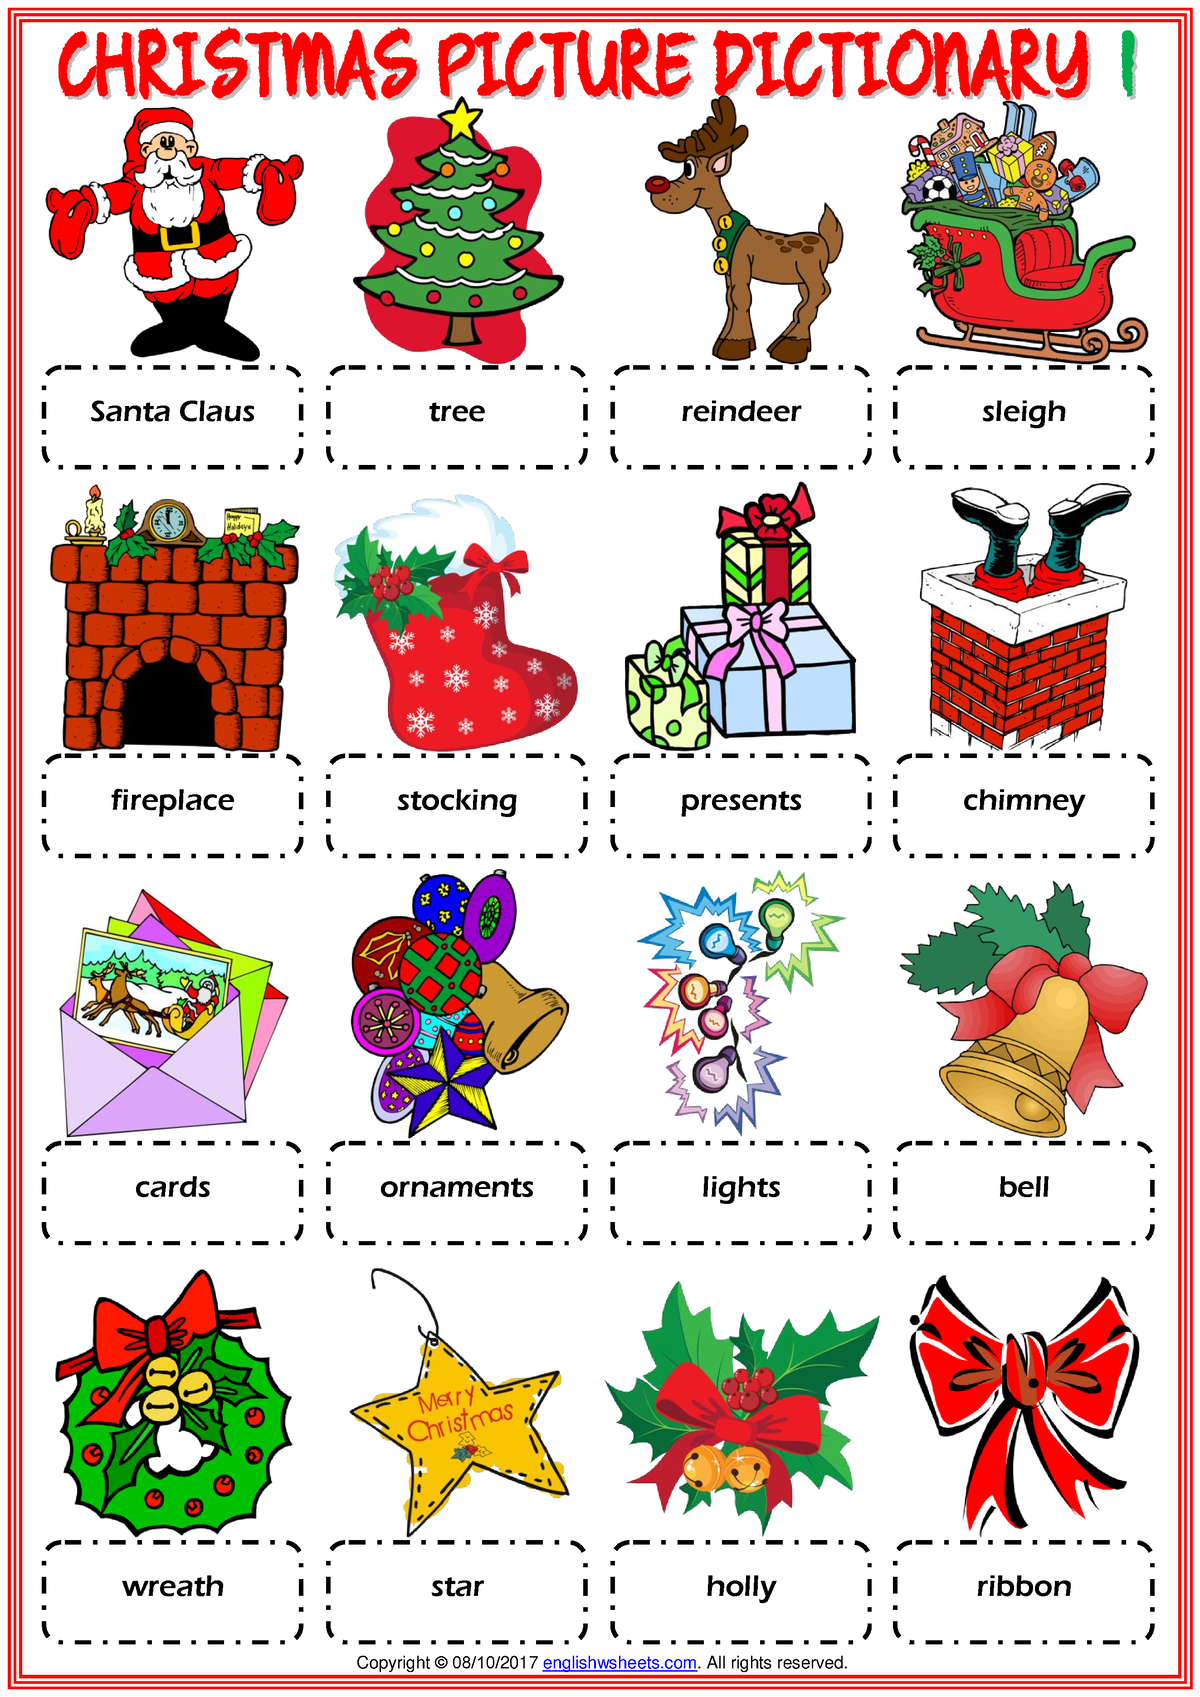 christmas-vocabulary-esl-picture-dictionary-worksheets-for-kids-santa